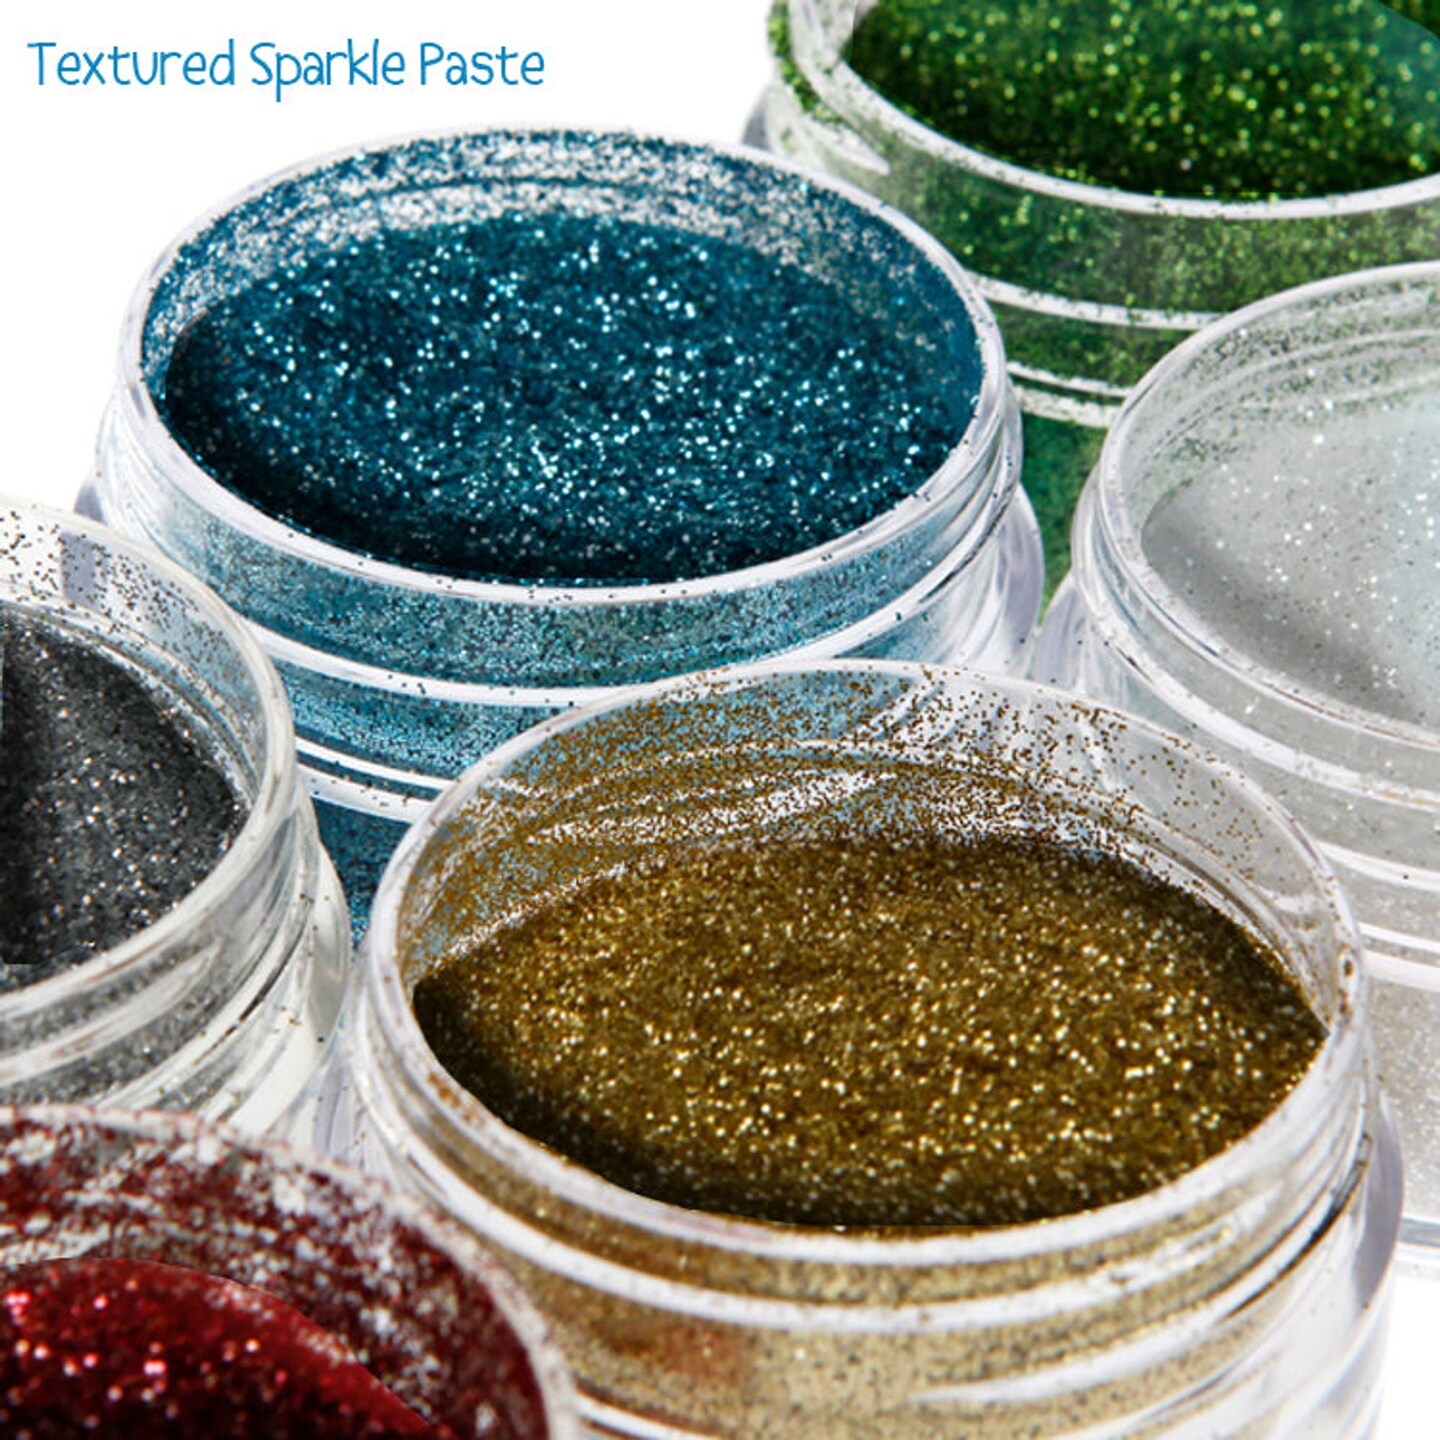 Cosmic Shimmer  Textured Sparkle Paste - Graceful Peach